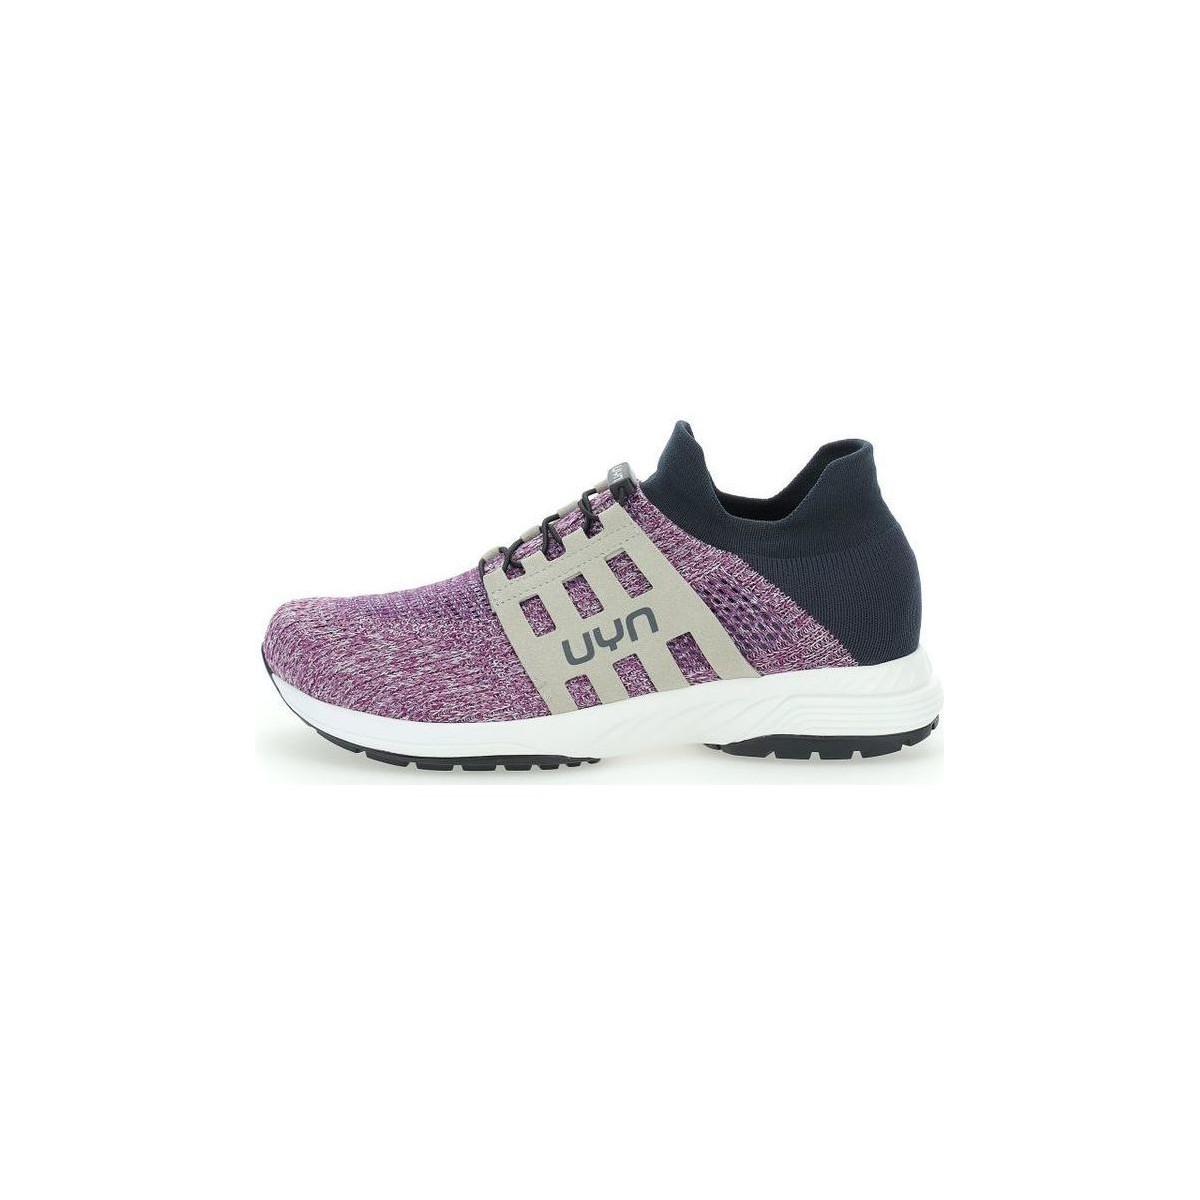 Chaussures Femme Multisport Uyn NATURE TUNE Violet